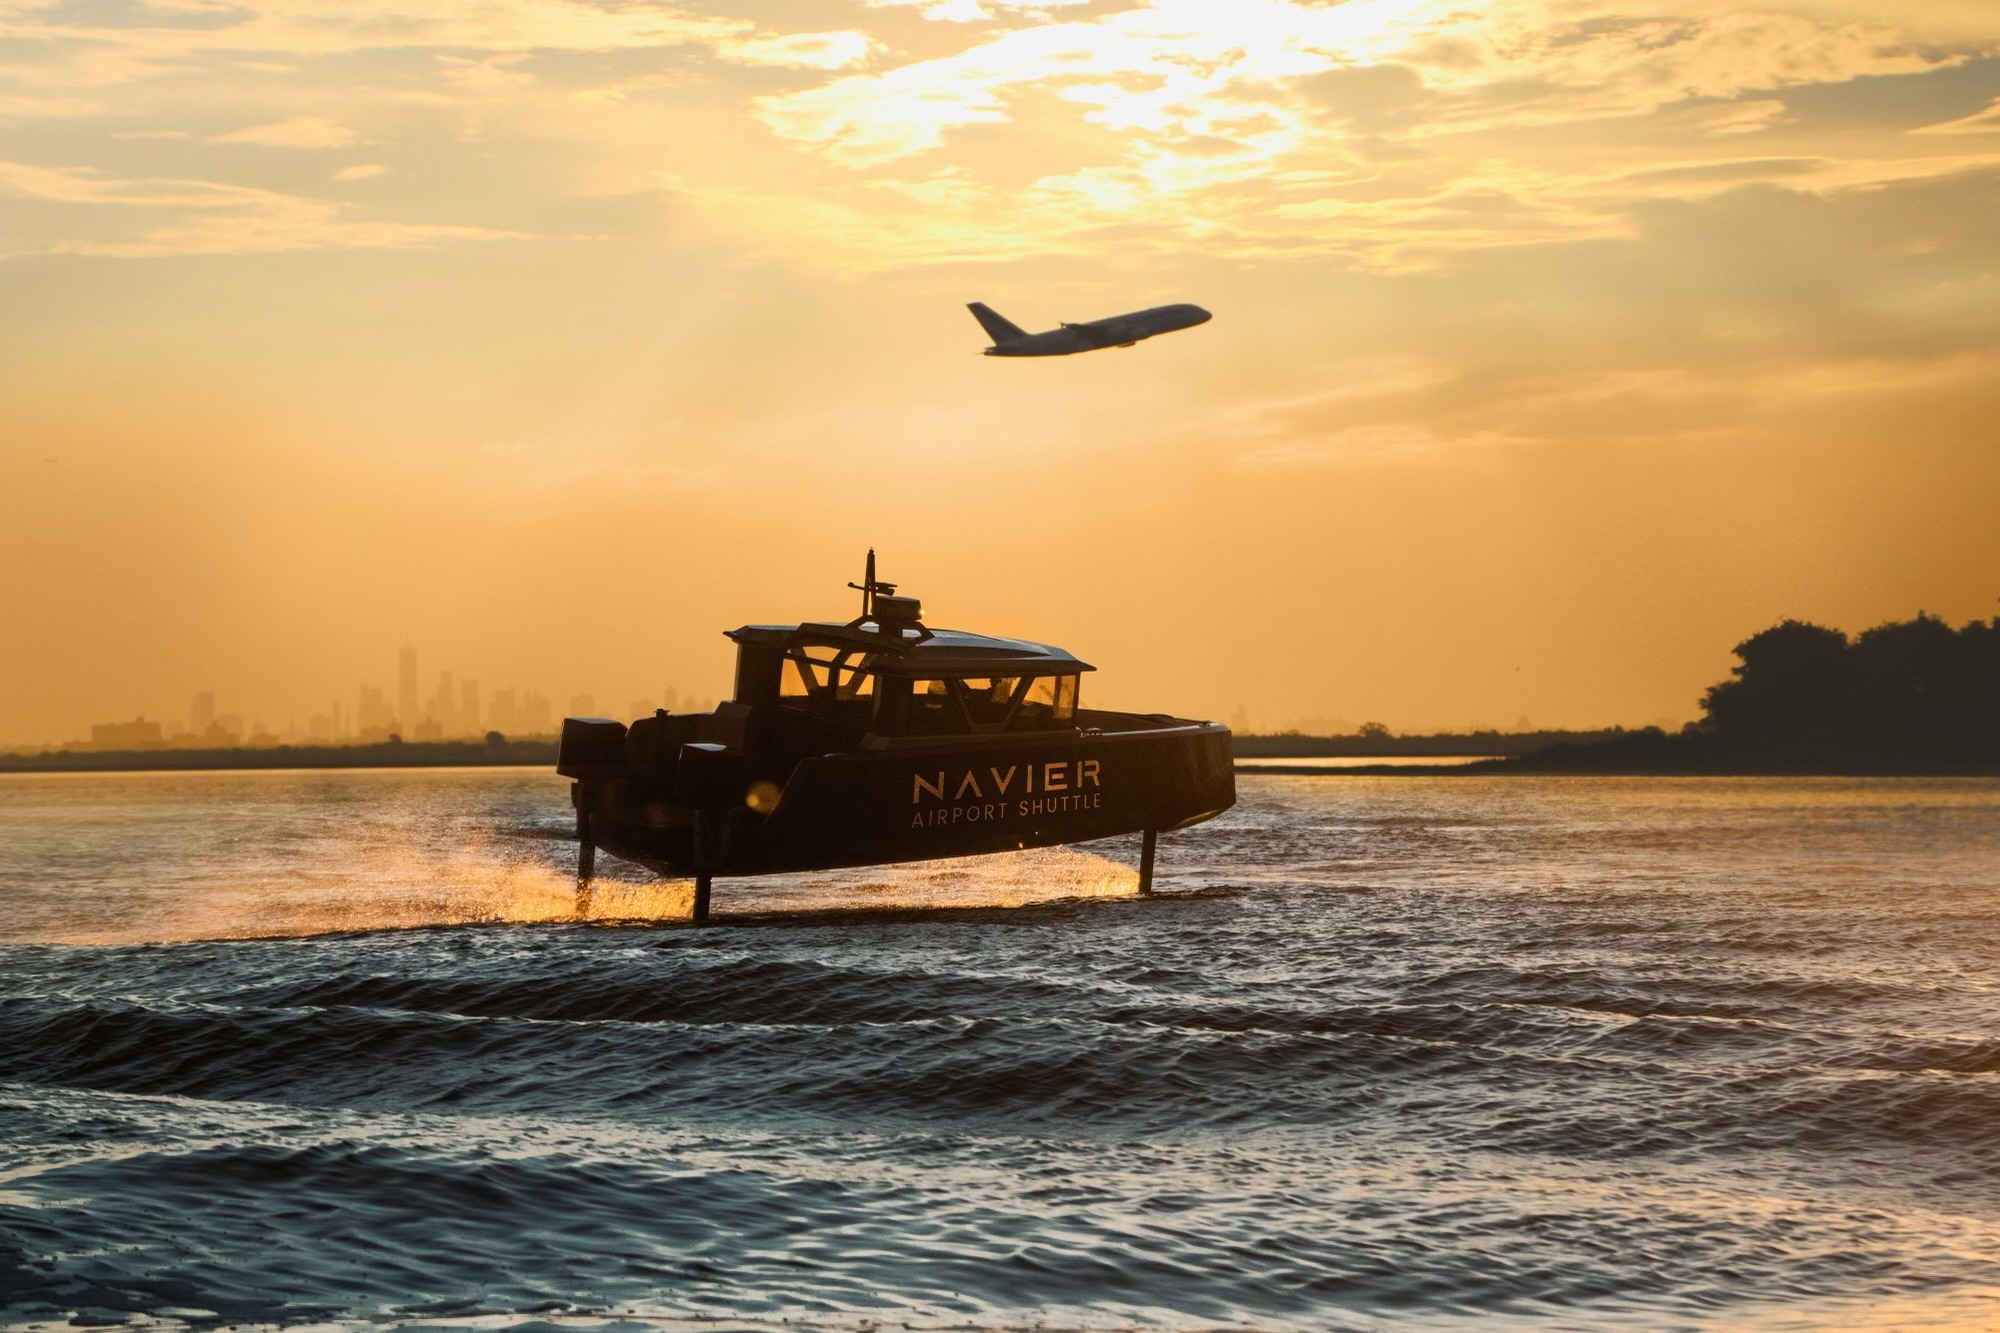 a ferry on the water at sunset with a plane taking off in the distance